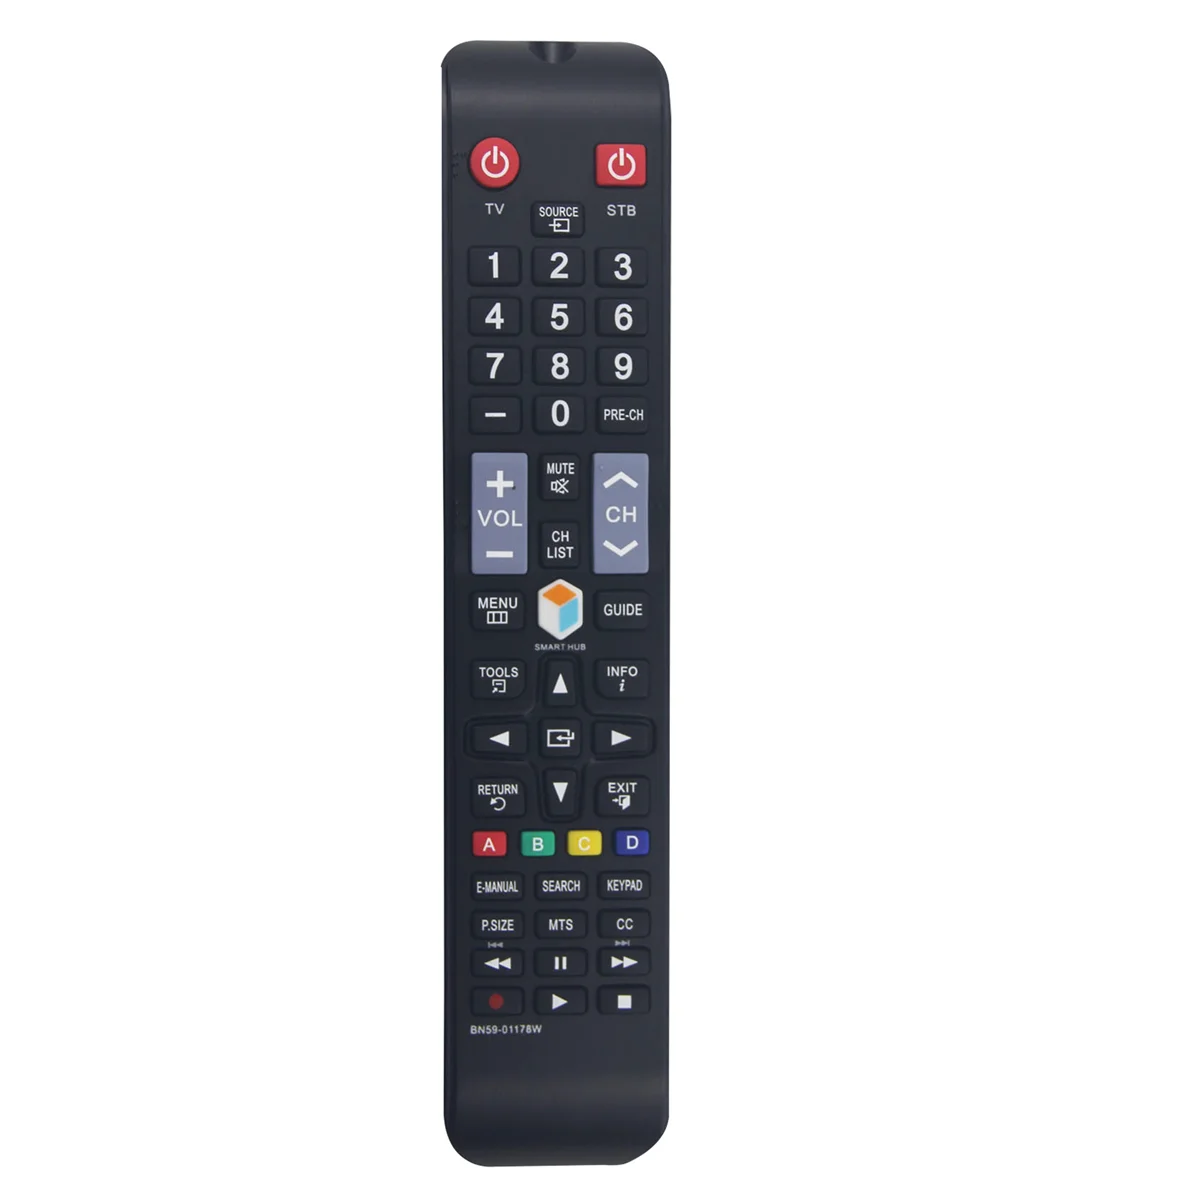 

BN59-01178W Replace Remote Control for LCD Smart TV BN59-01199F BN59-00857A AA59-00637A AA59-00652A BN59-01259E